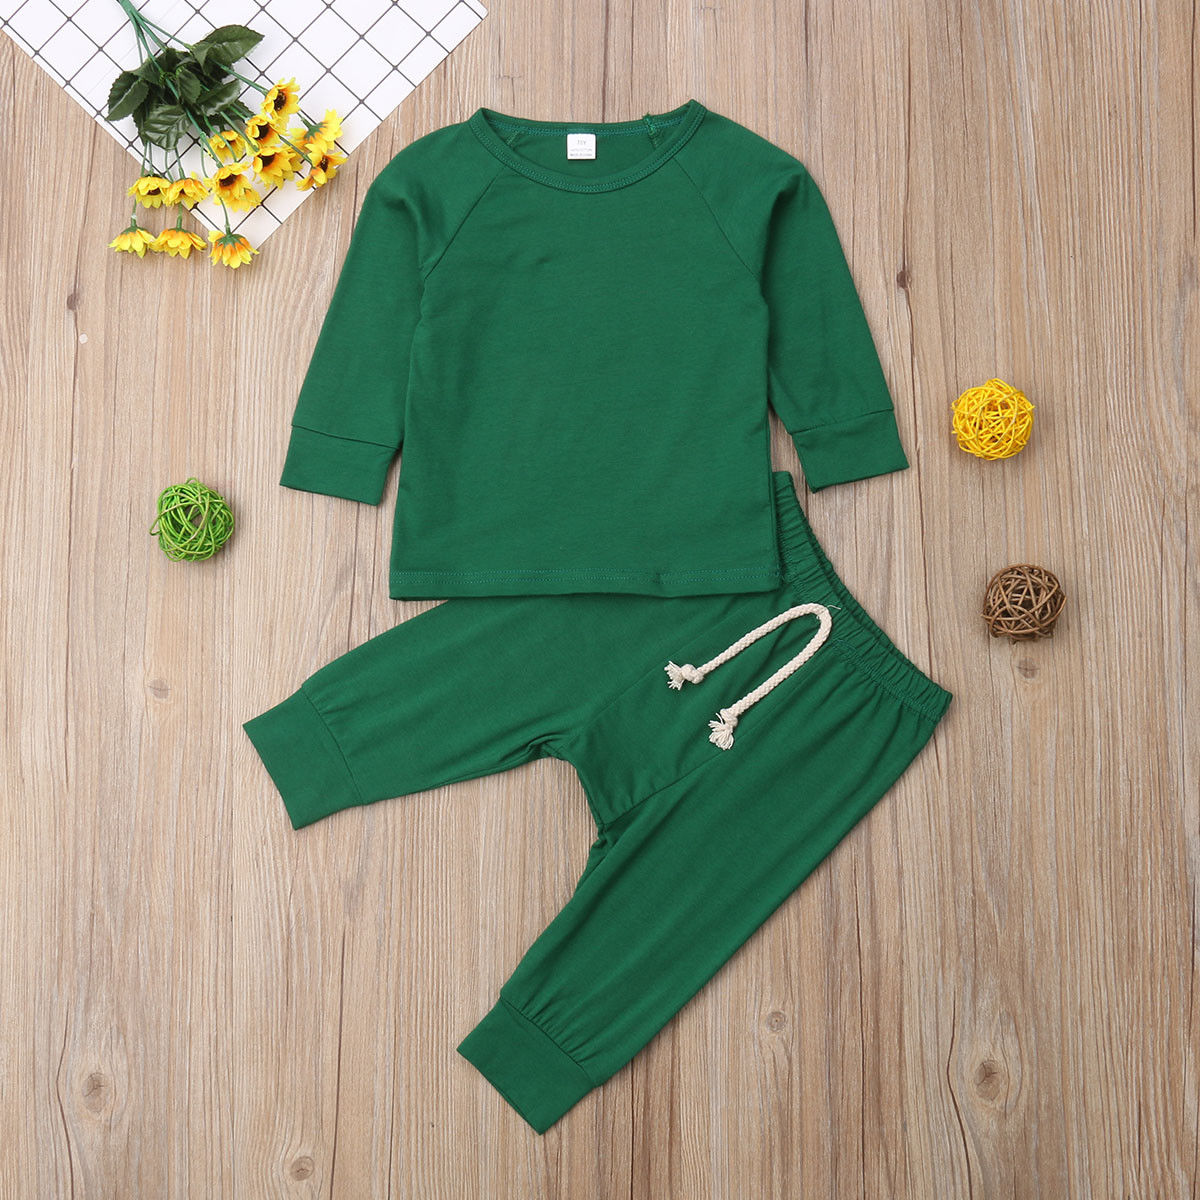 Casual Newborn Baby Boy Girl Solid Color Long Sleeve Cotton T-shirt Tops Long Pant 2PCS Homewear Baby Clothing Set